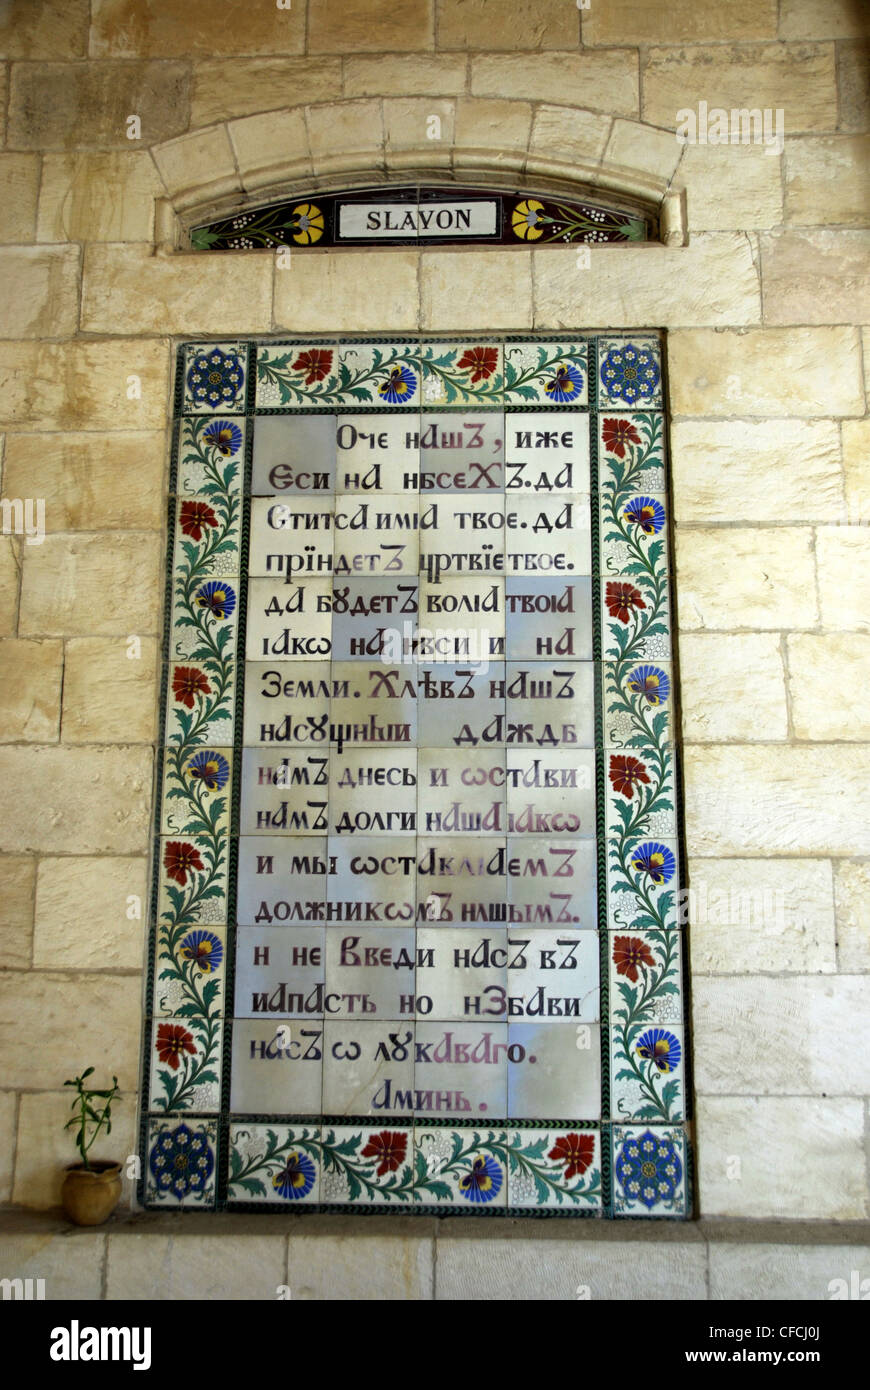 The Lord's Prayer plaque in Slavonic in the Church of the Pater Noster in Jerusalem, Israel Stock Photo